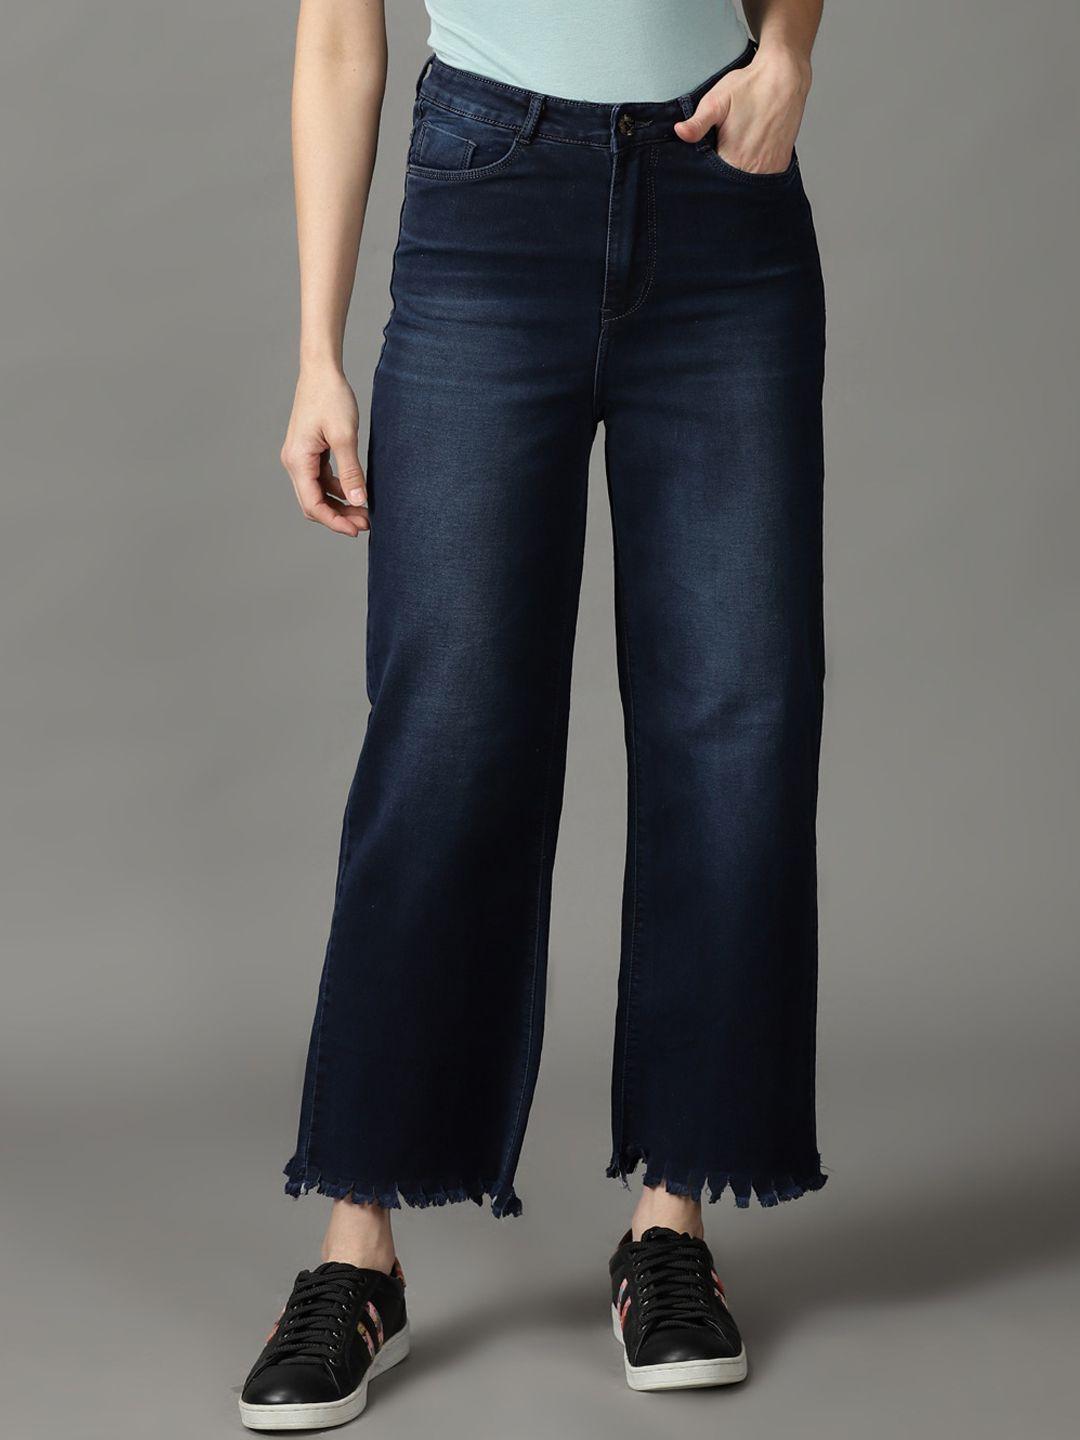 showoff-women-straight-fit-high-rise-light-fade-stretchable-jeans